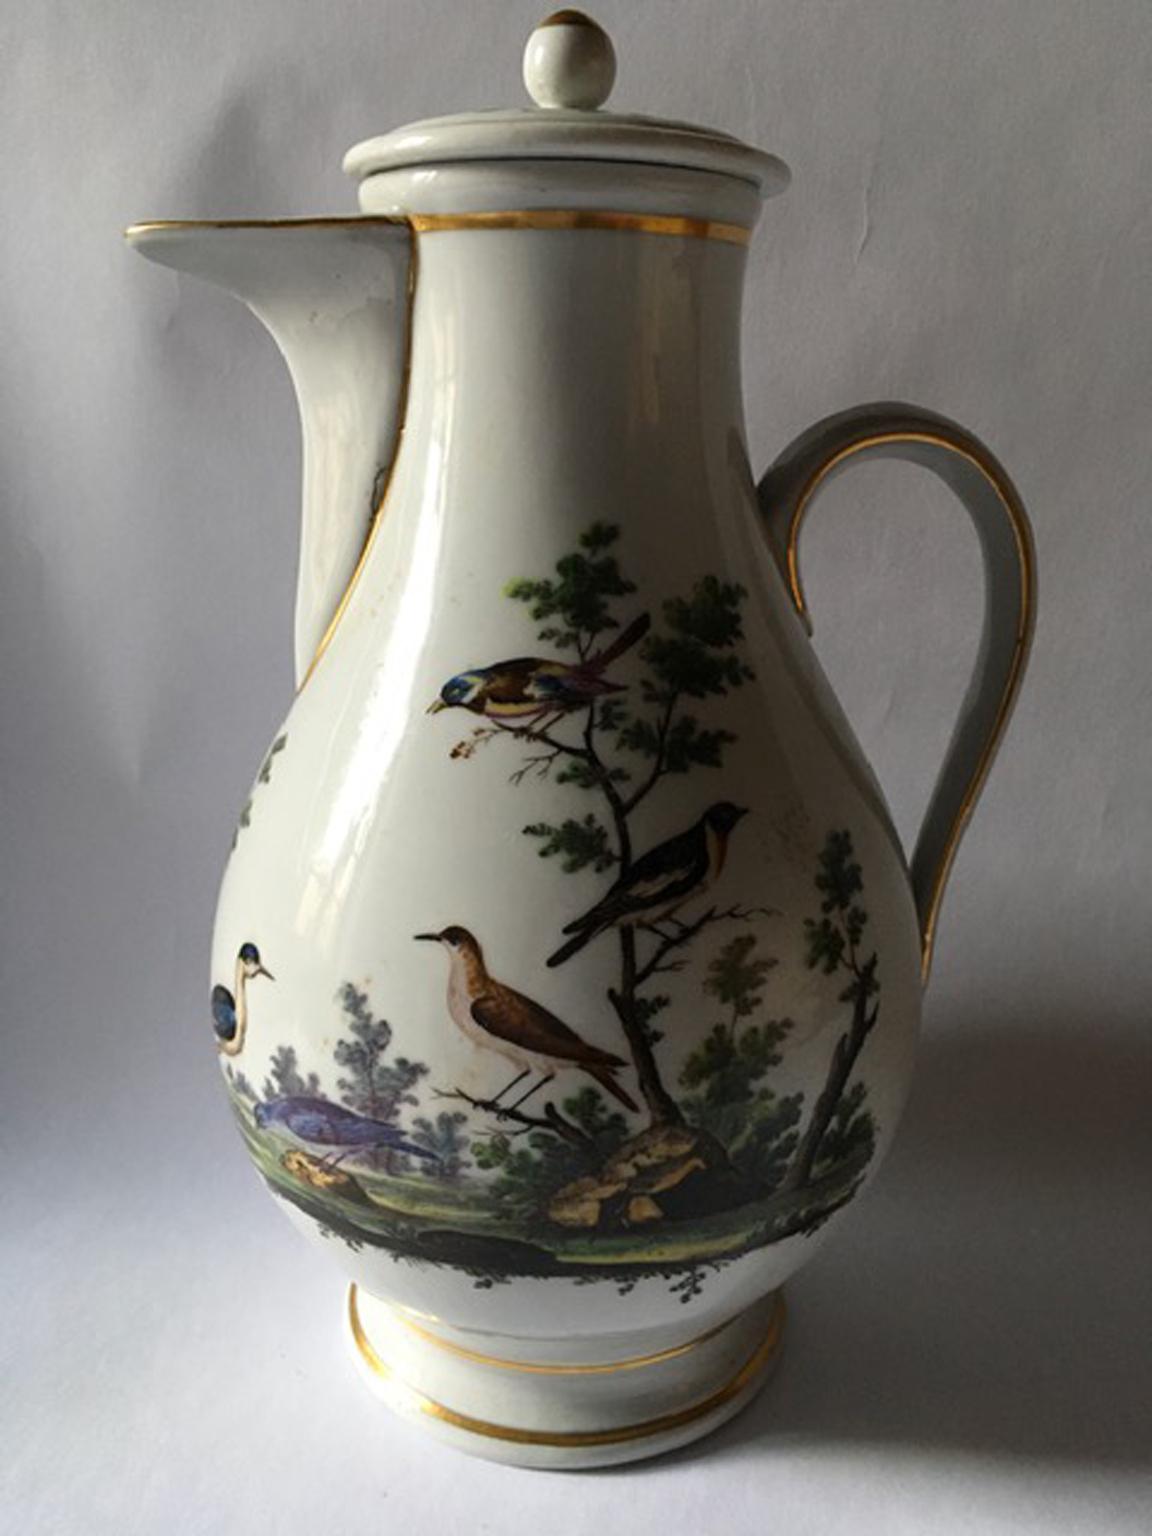 In this elegant coffee pot we can admire the elegant drawing with a natural landscape full of many specimens of birds.
Manufactured in circa 1750, the piece has its time but it is in good conditions.
A piece to collect.

With Certificate of